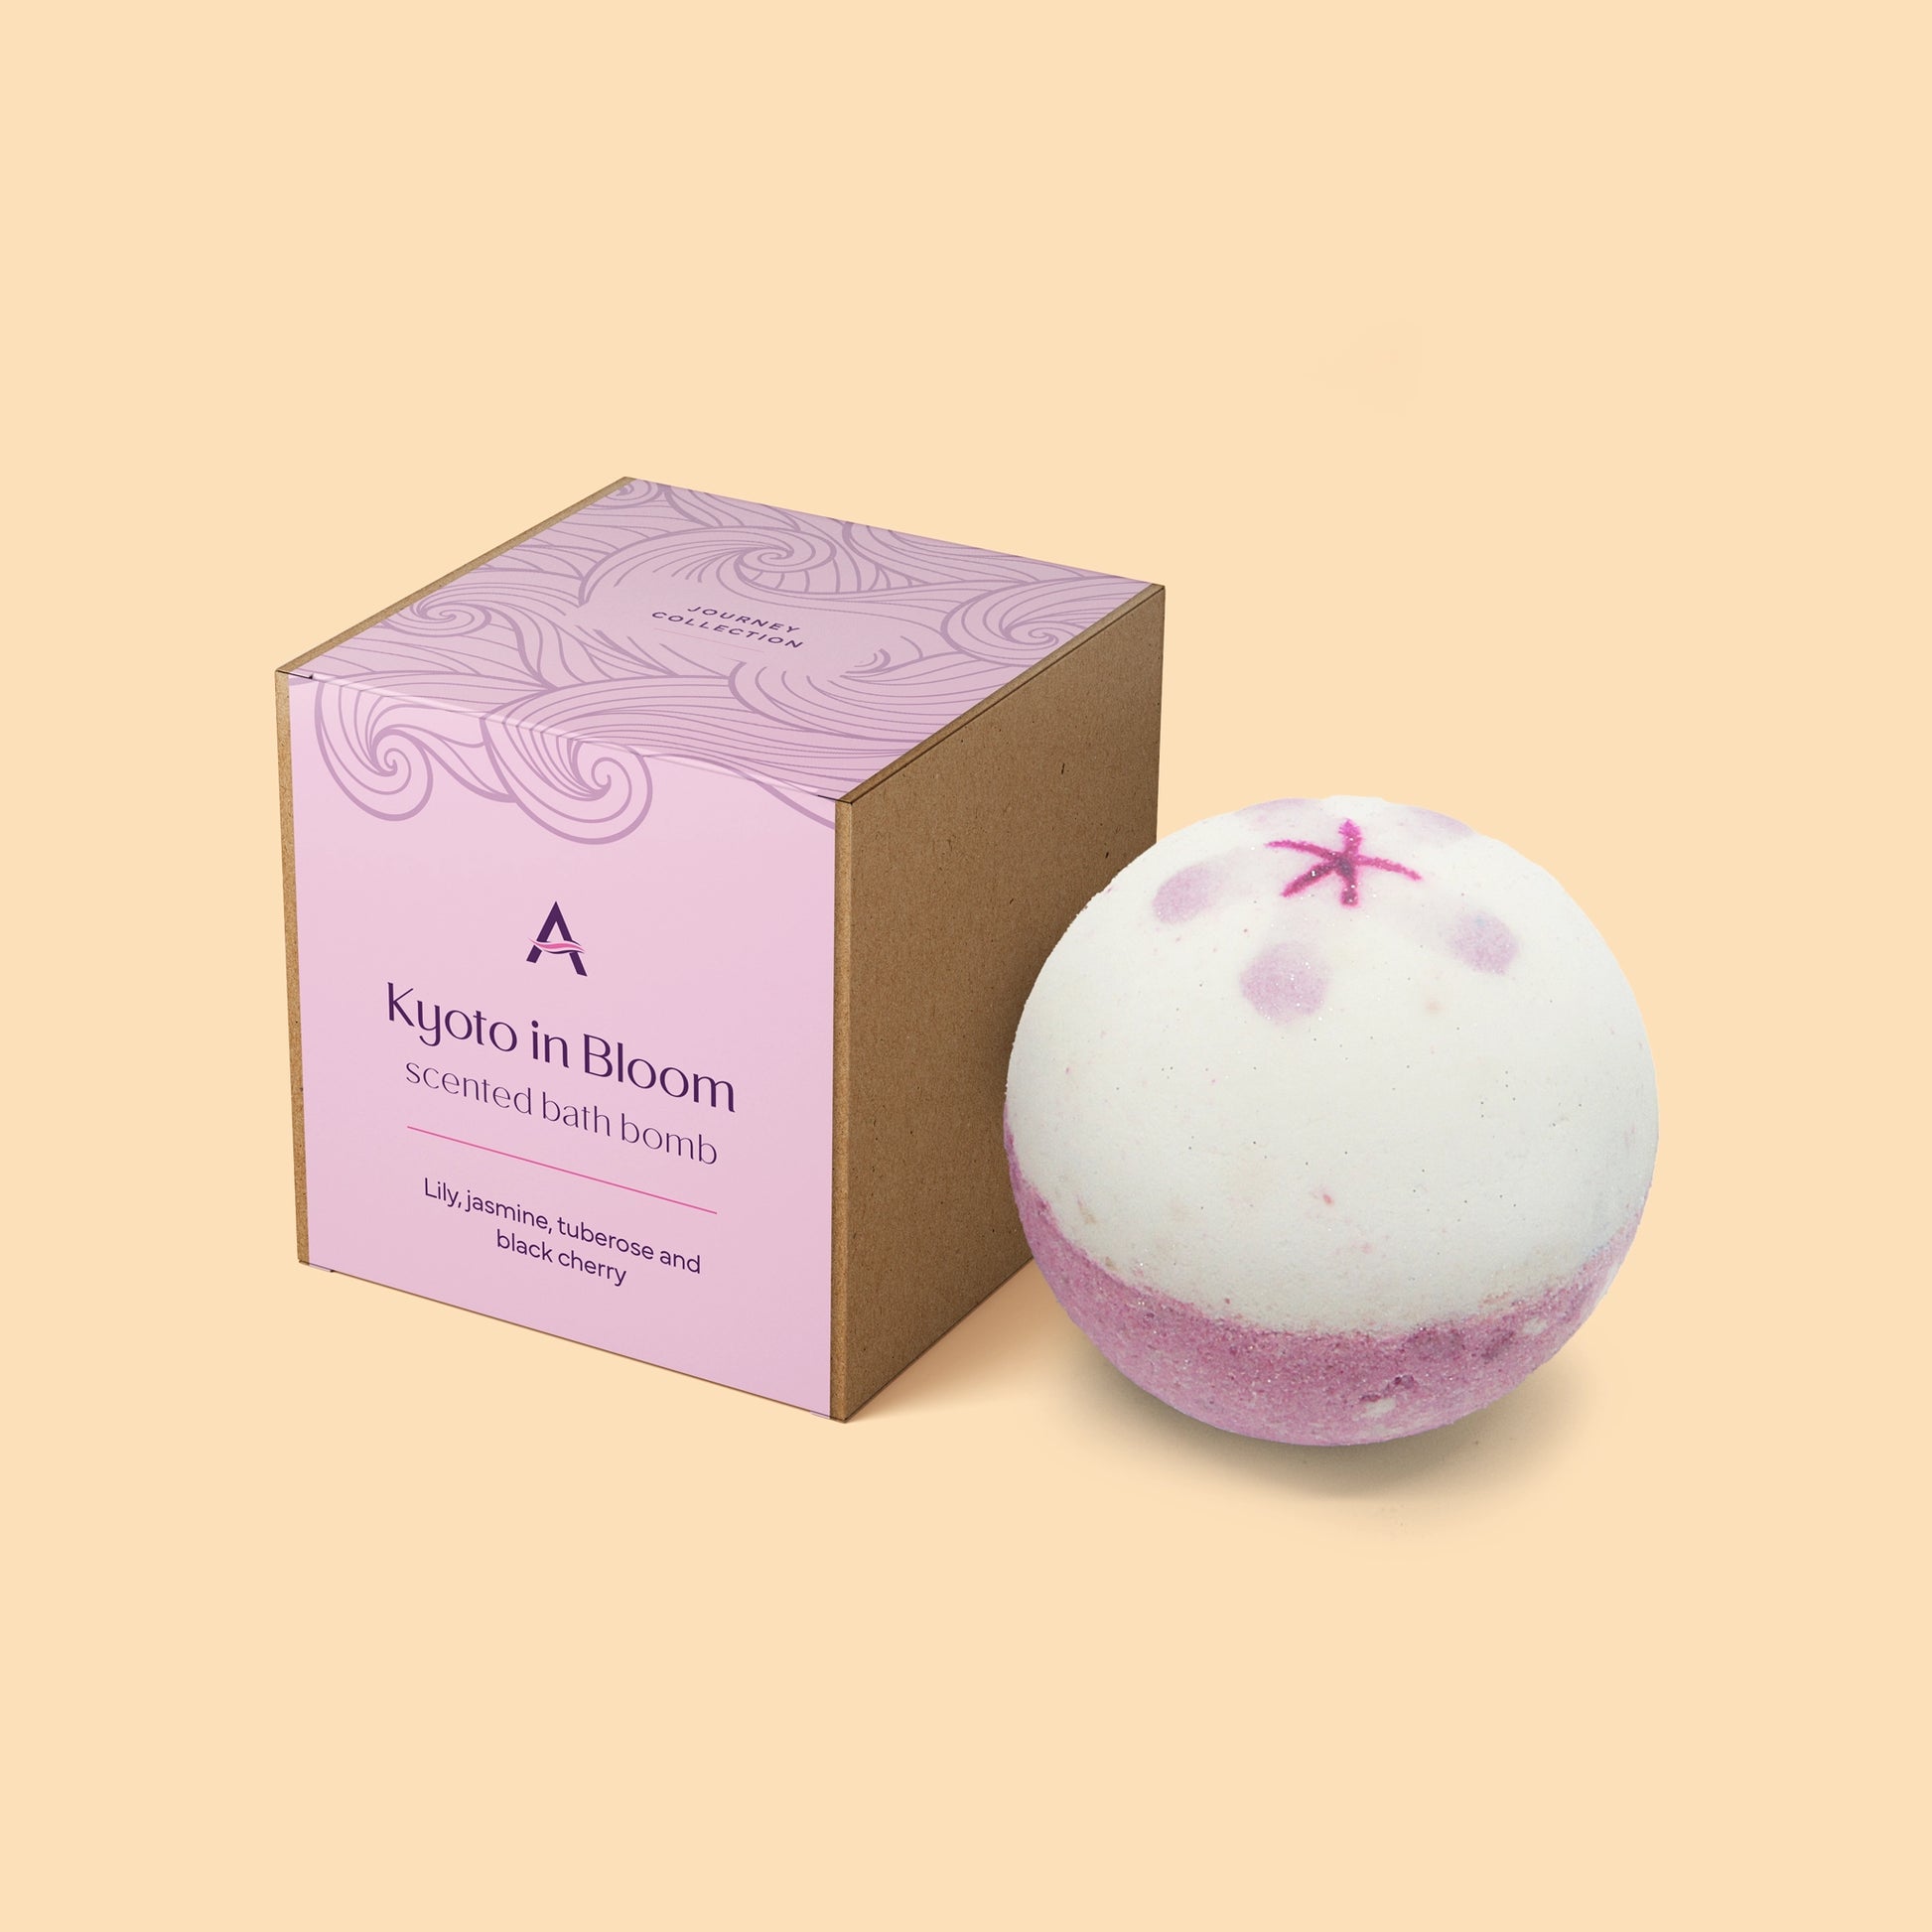 Kyoto in Bloom cherry blossom bath bomb with box